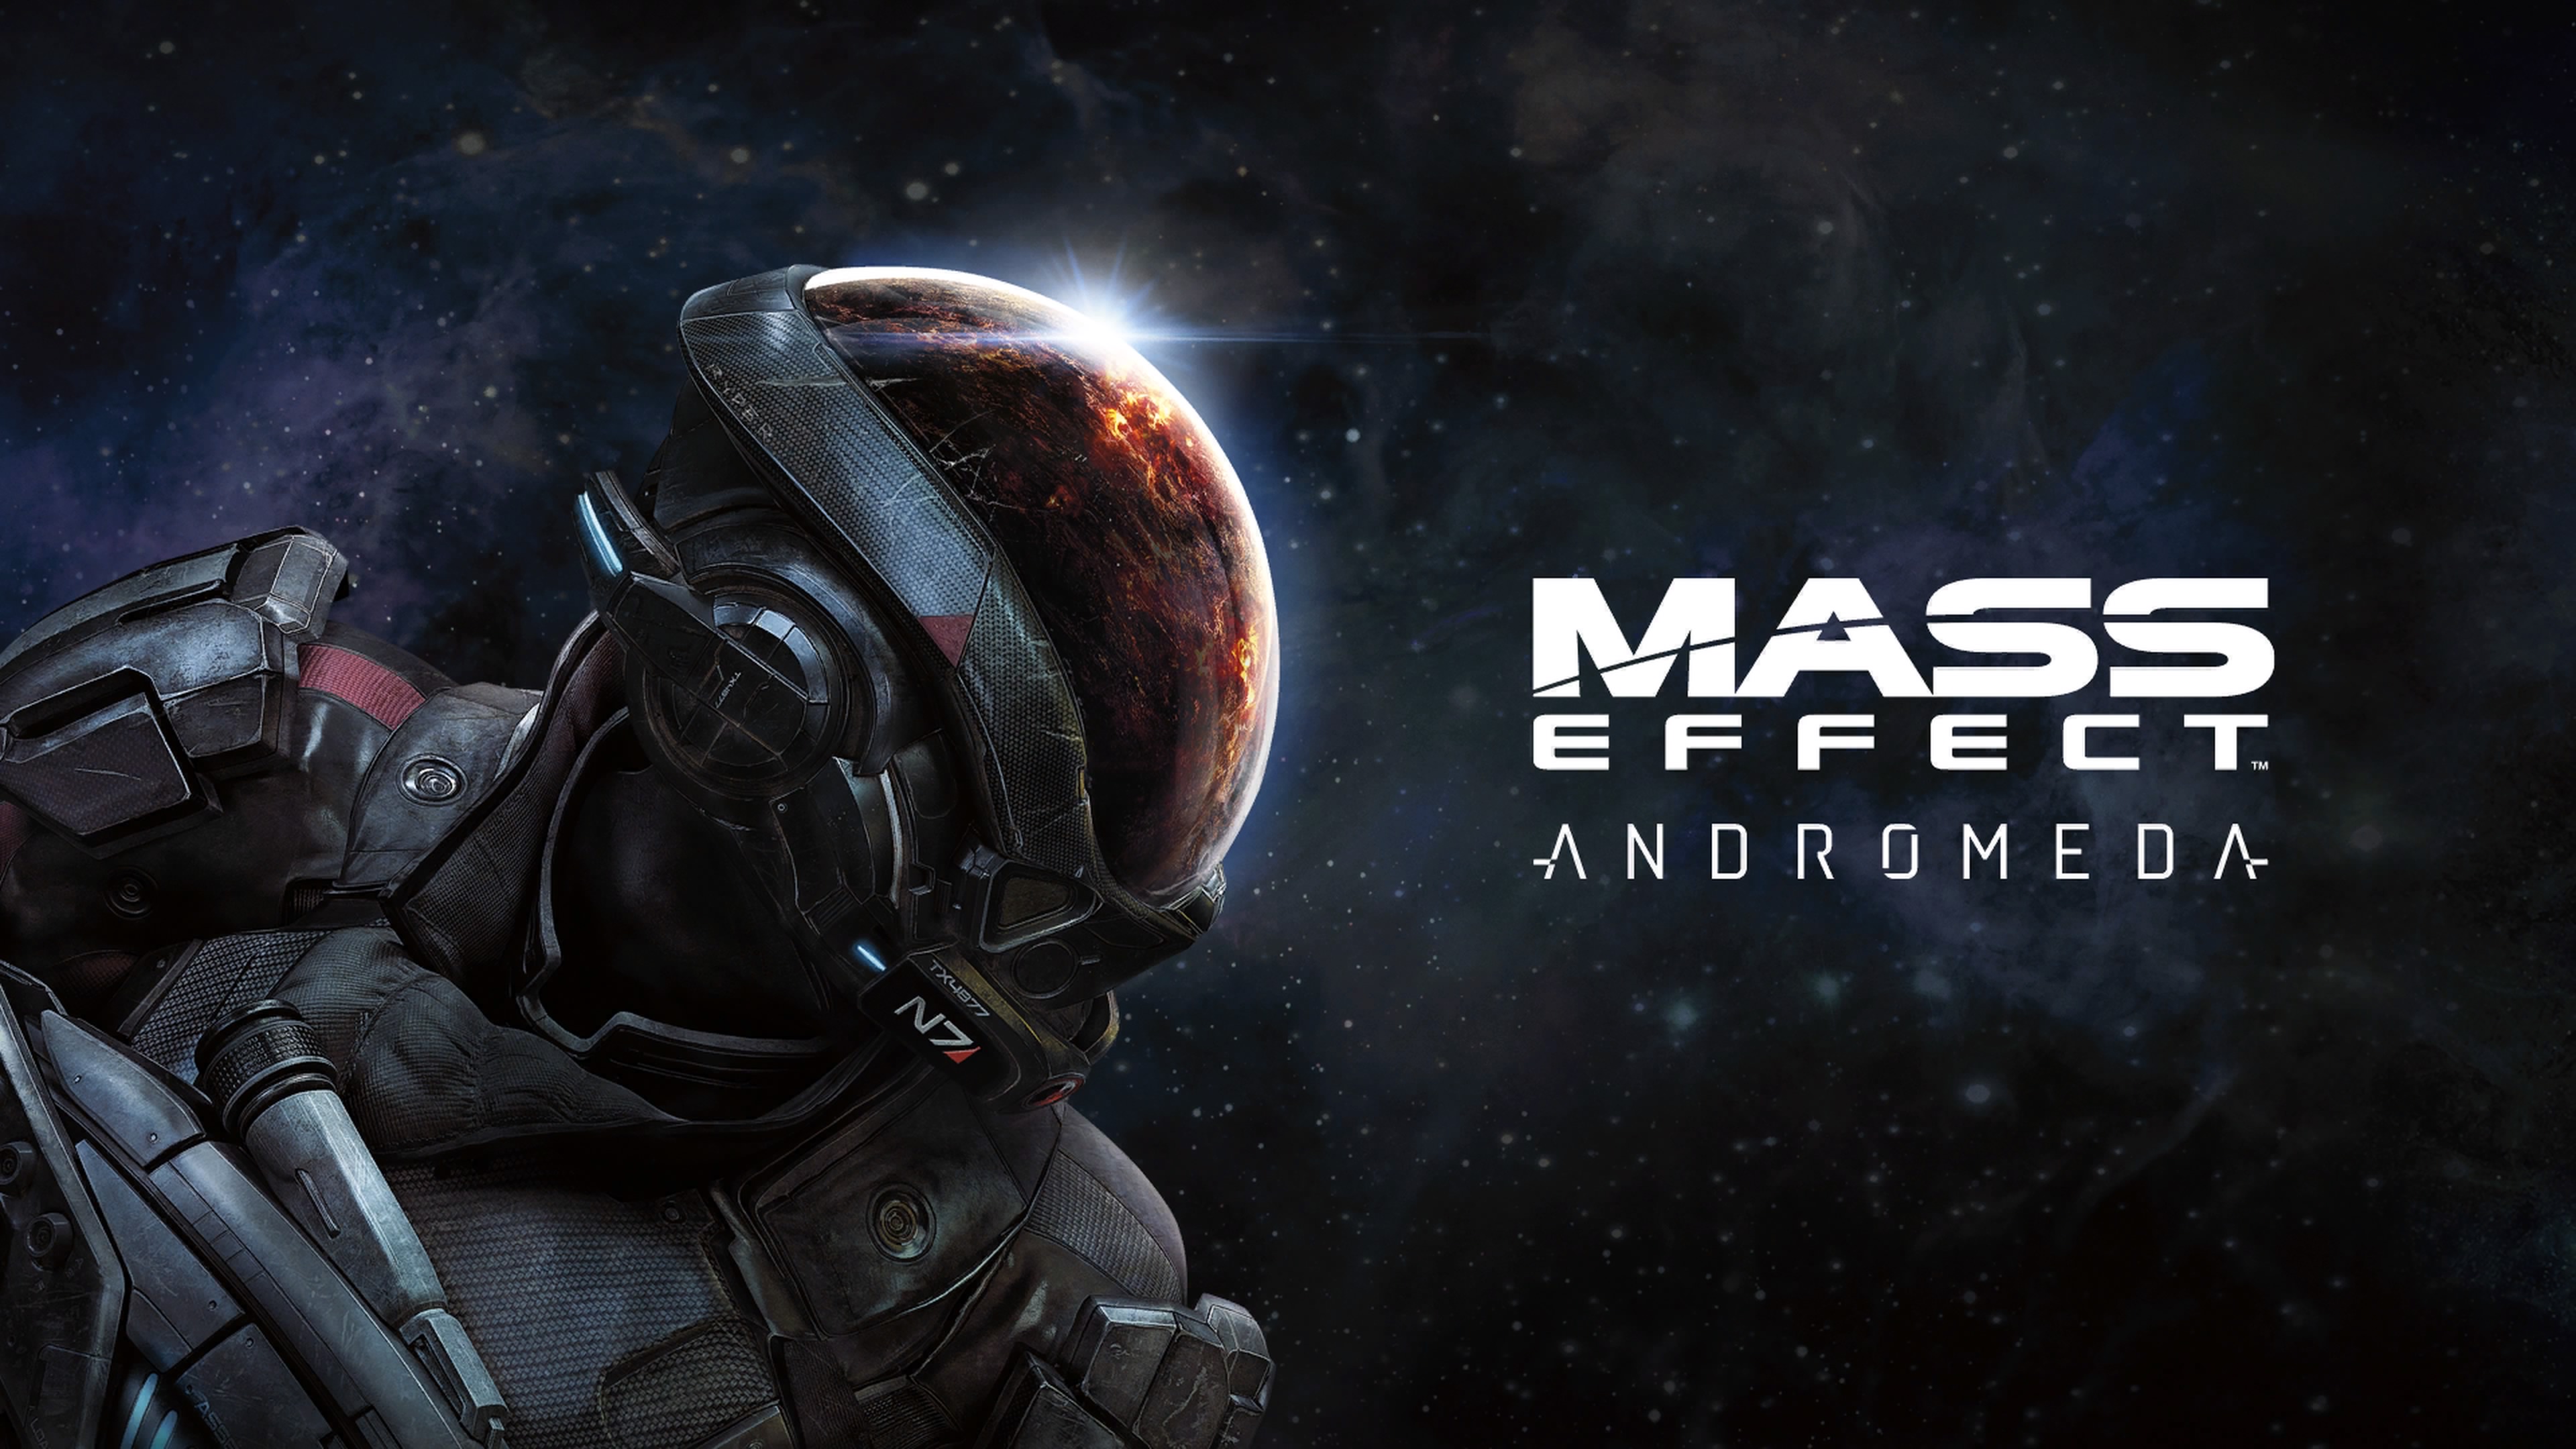 mass effect andromeda desktop wallpaper,action adventure game,pc game,space,shooter game,digital compositing